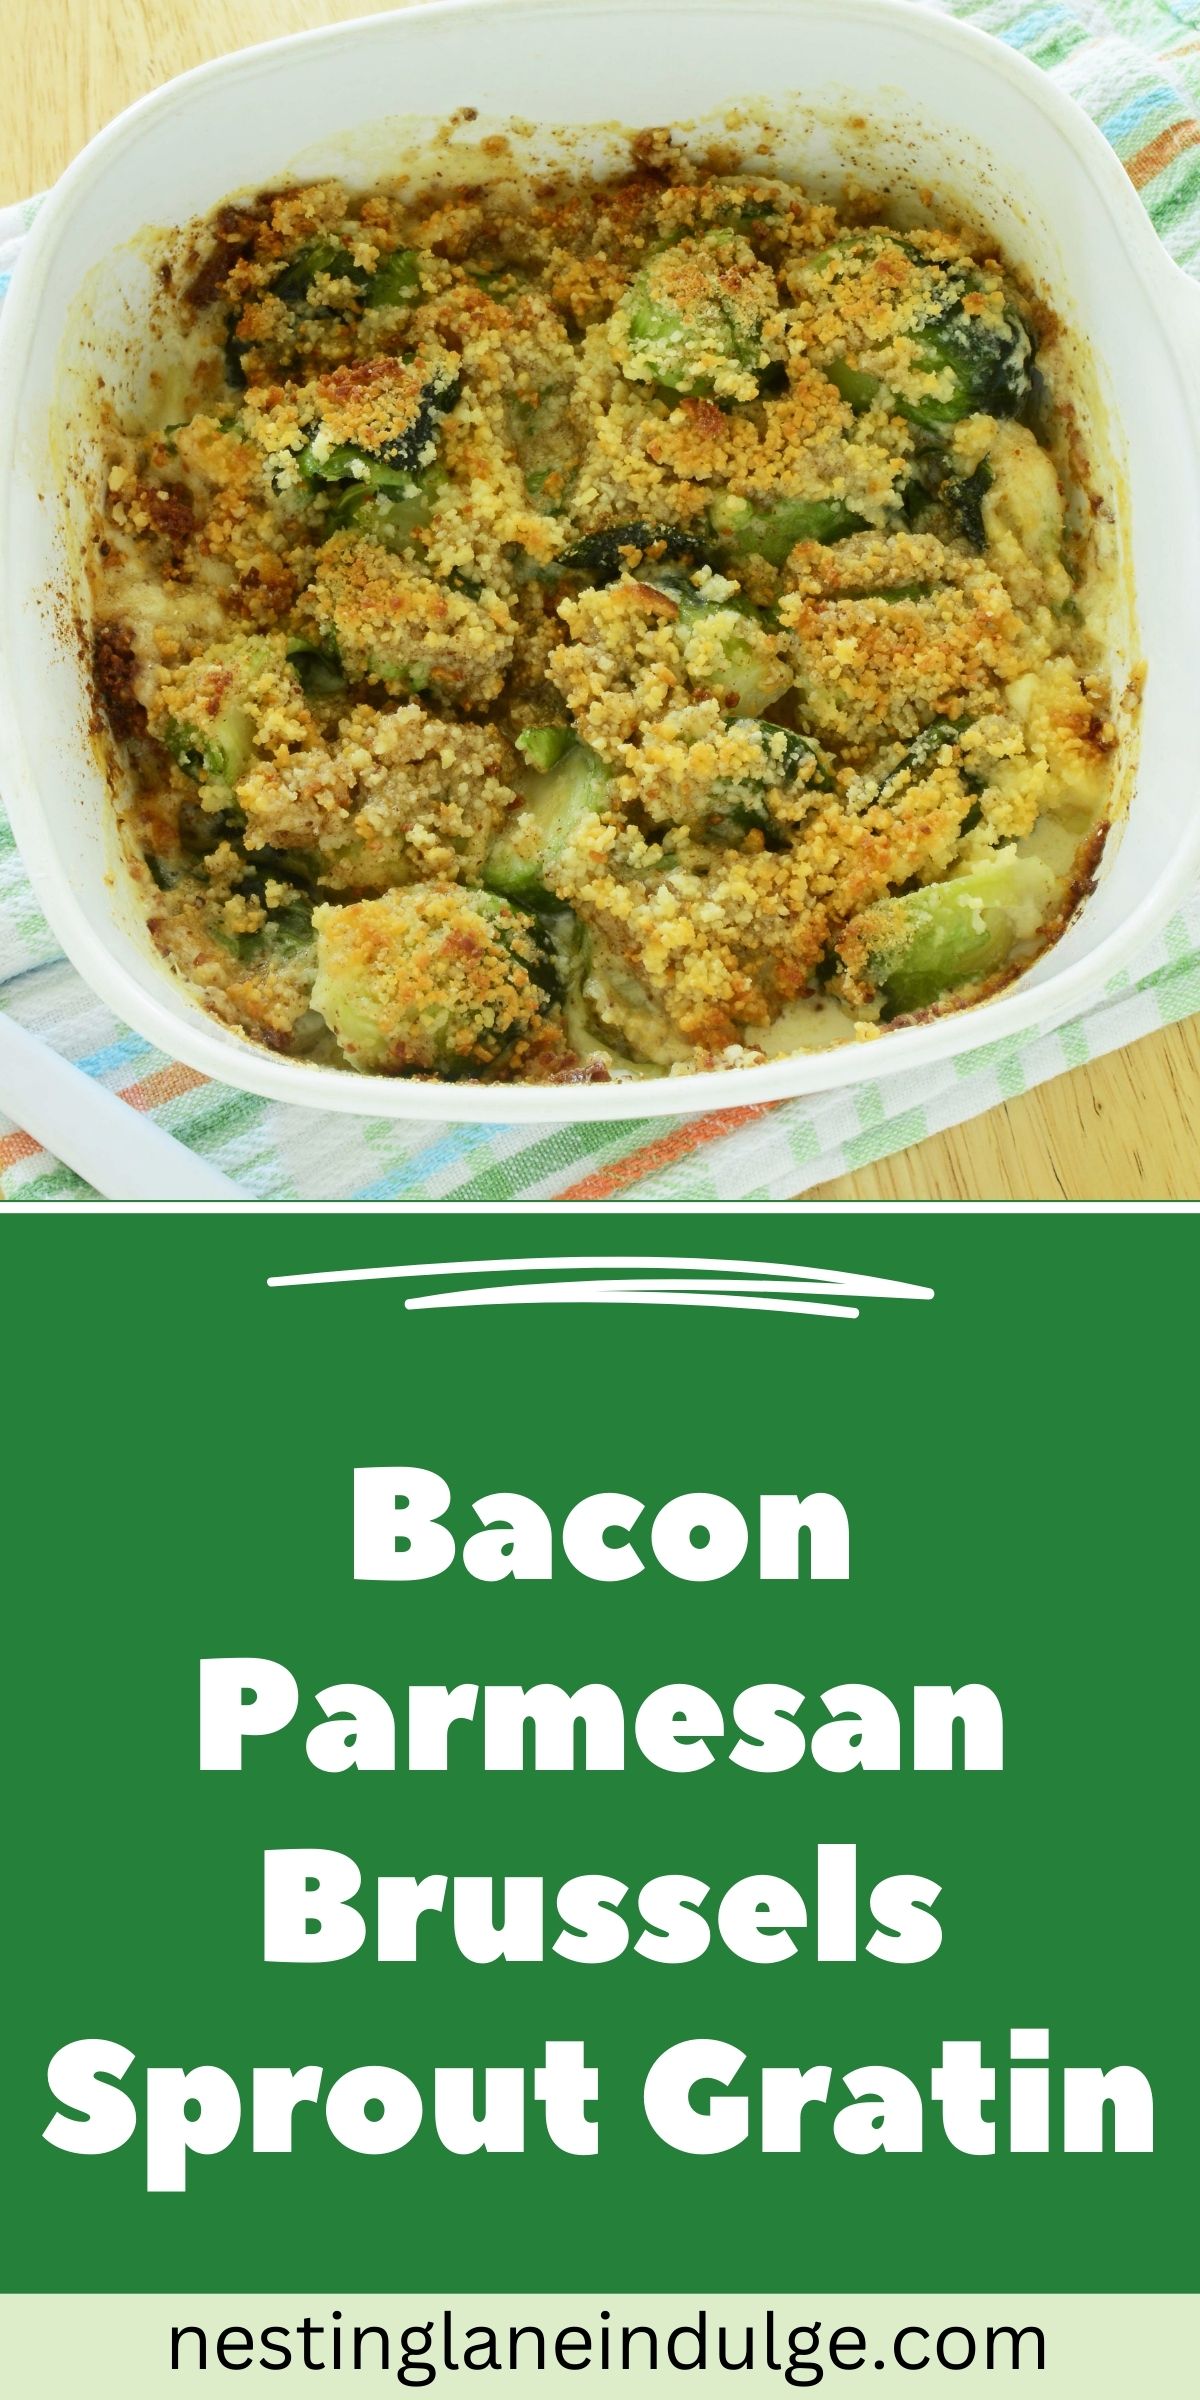 Graphic for Pinterest of Bacon Parmesan Brussels Sprout Gratin Recipe.